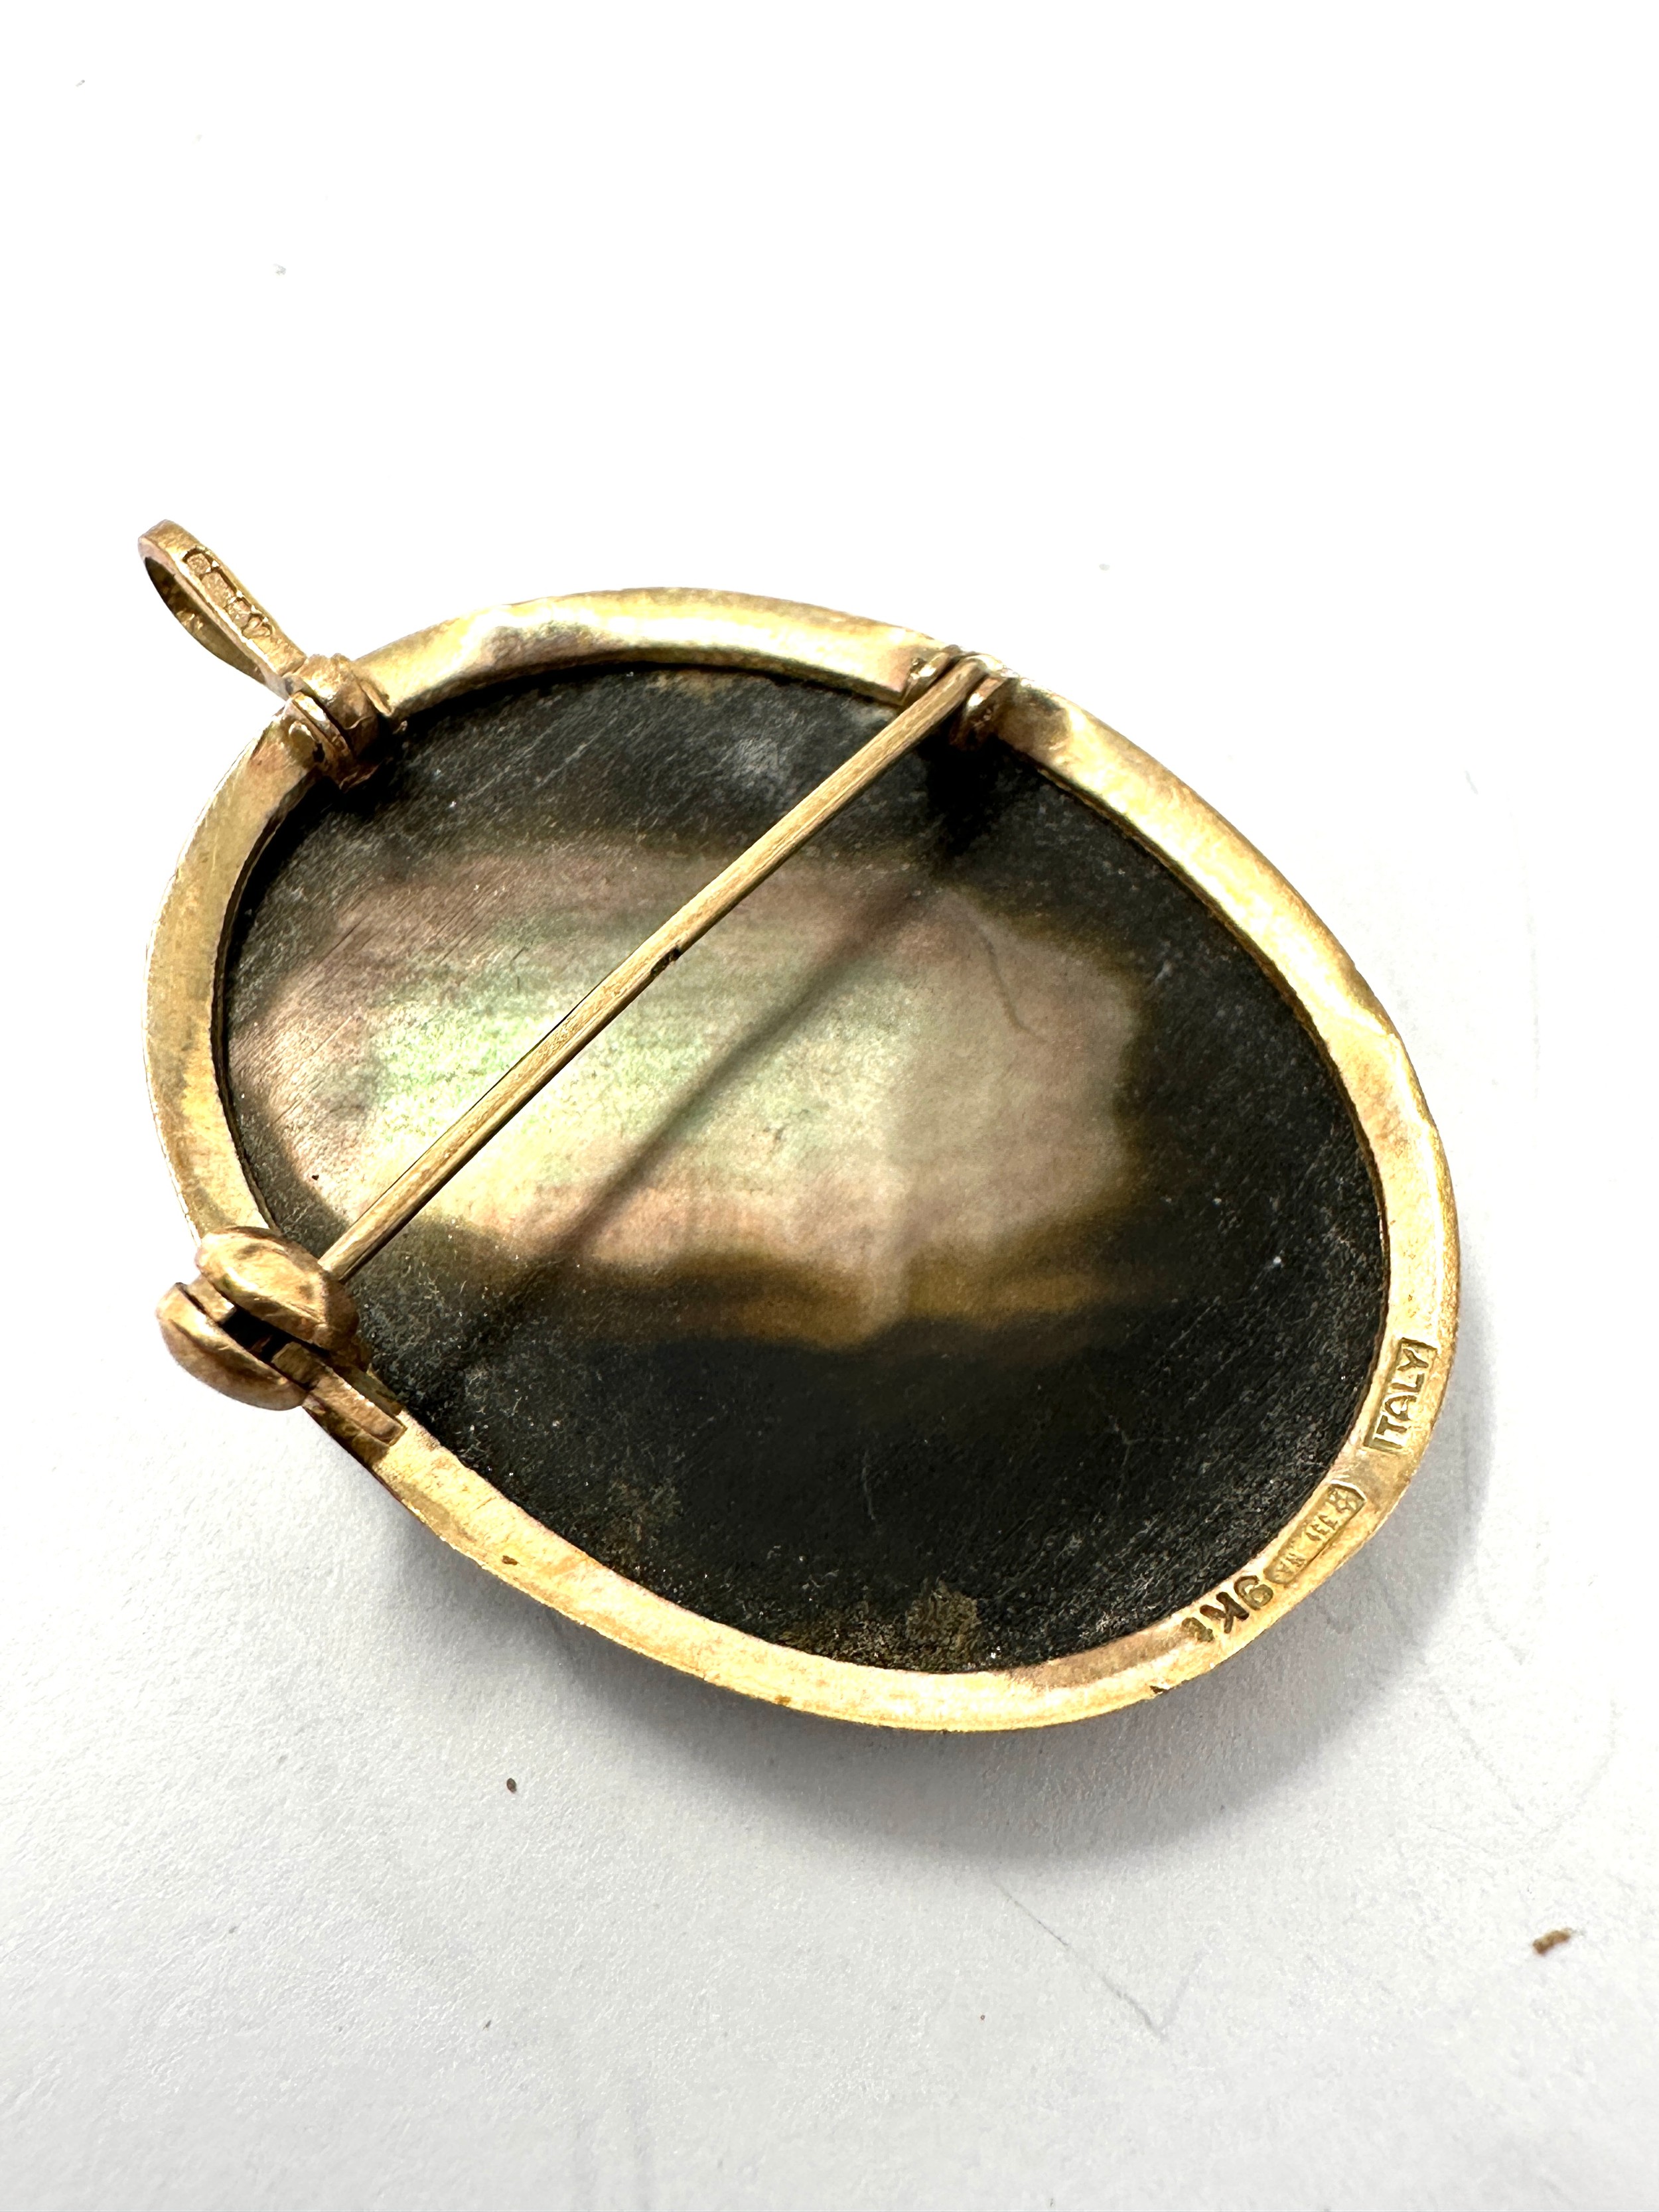 9ct Gold Mother Of Pearl Cameo Brooch (5.2g) - Image 2 of 2